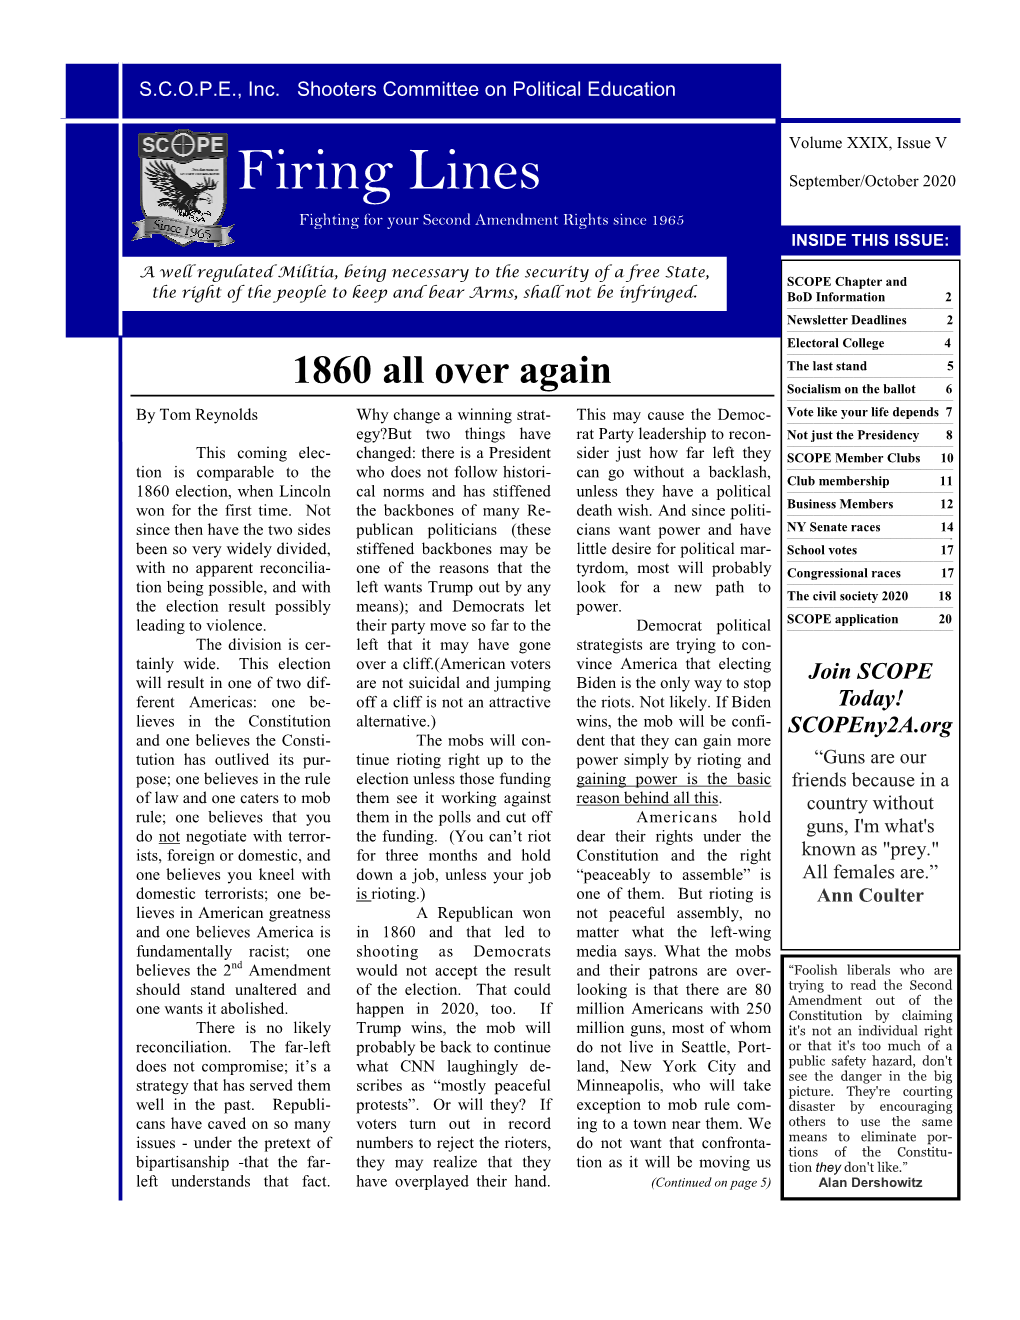 Firing Lines September/October 2020 Fighting for Your Second Amendment Rights Since 1965 INSIDE THIS ISSUE